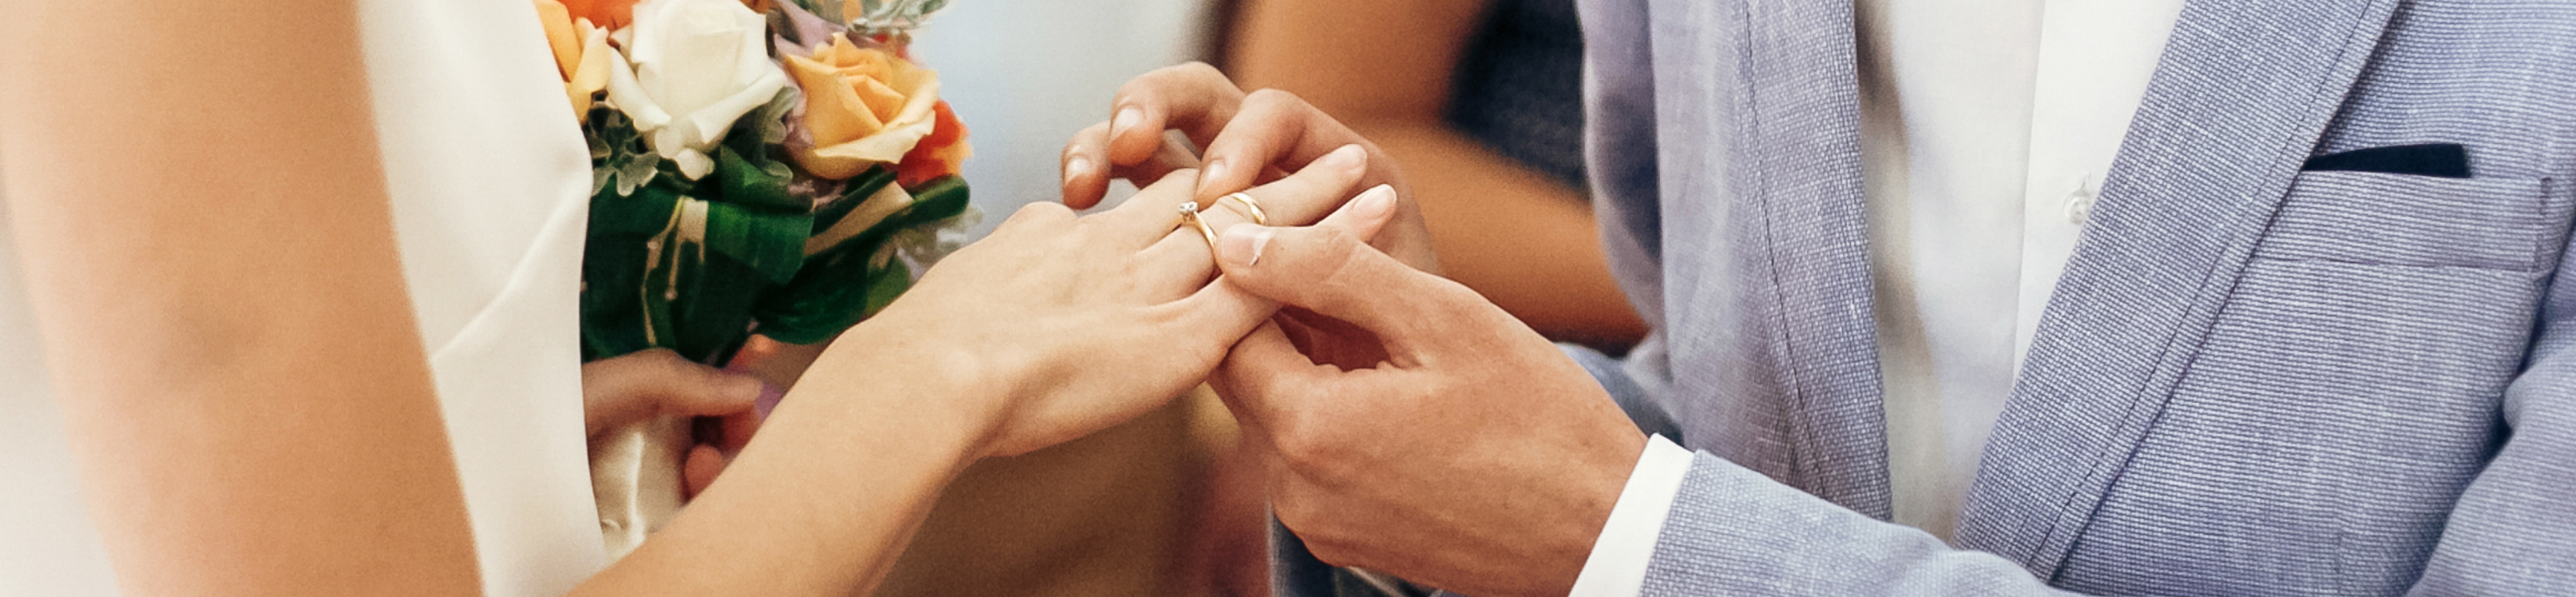 Why Are Engagement Rings So Expensive?